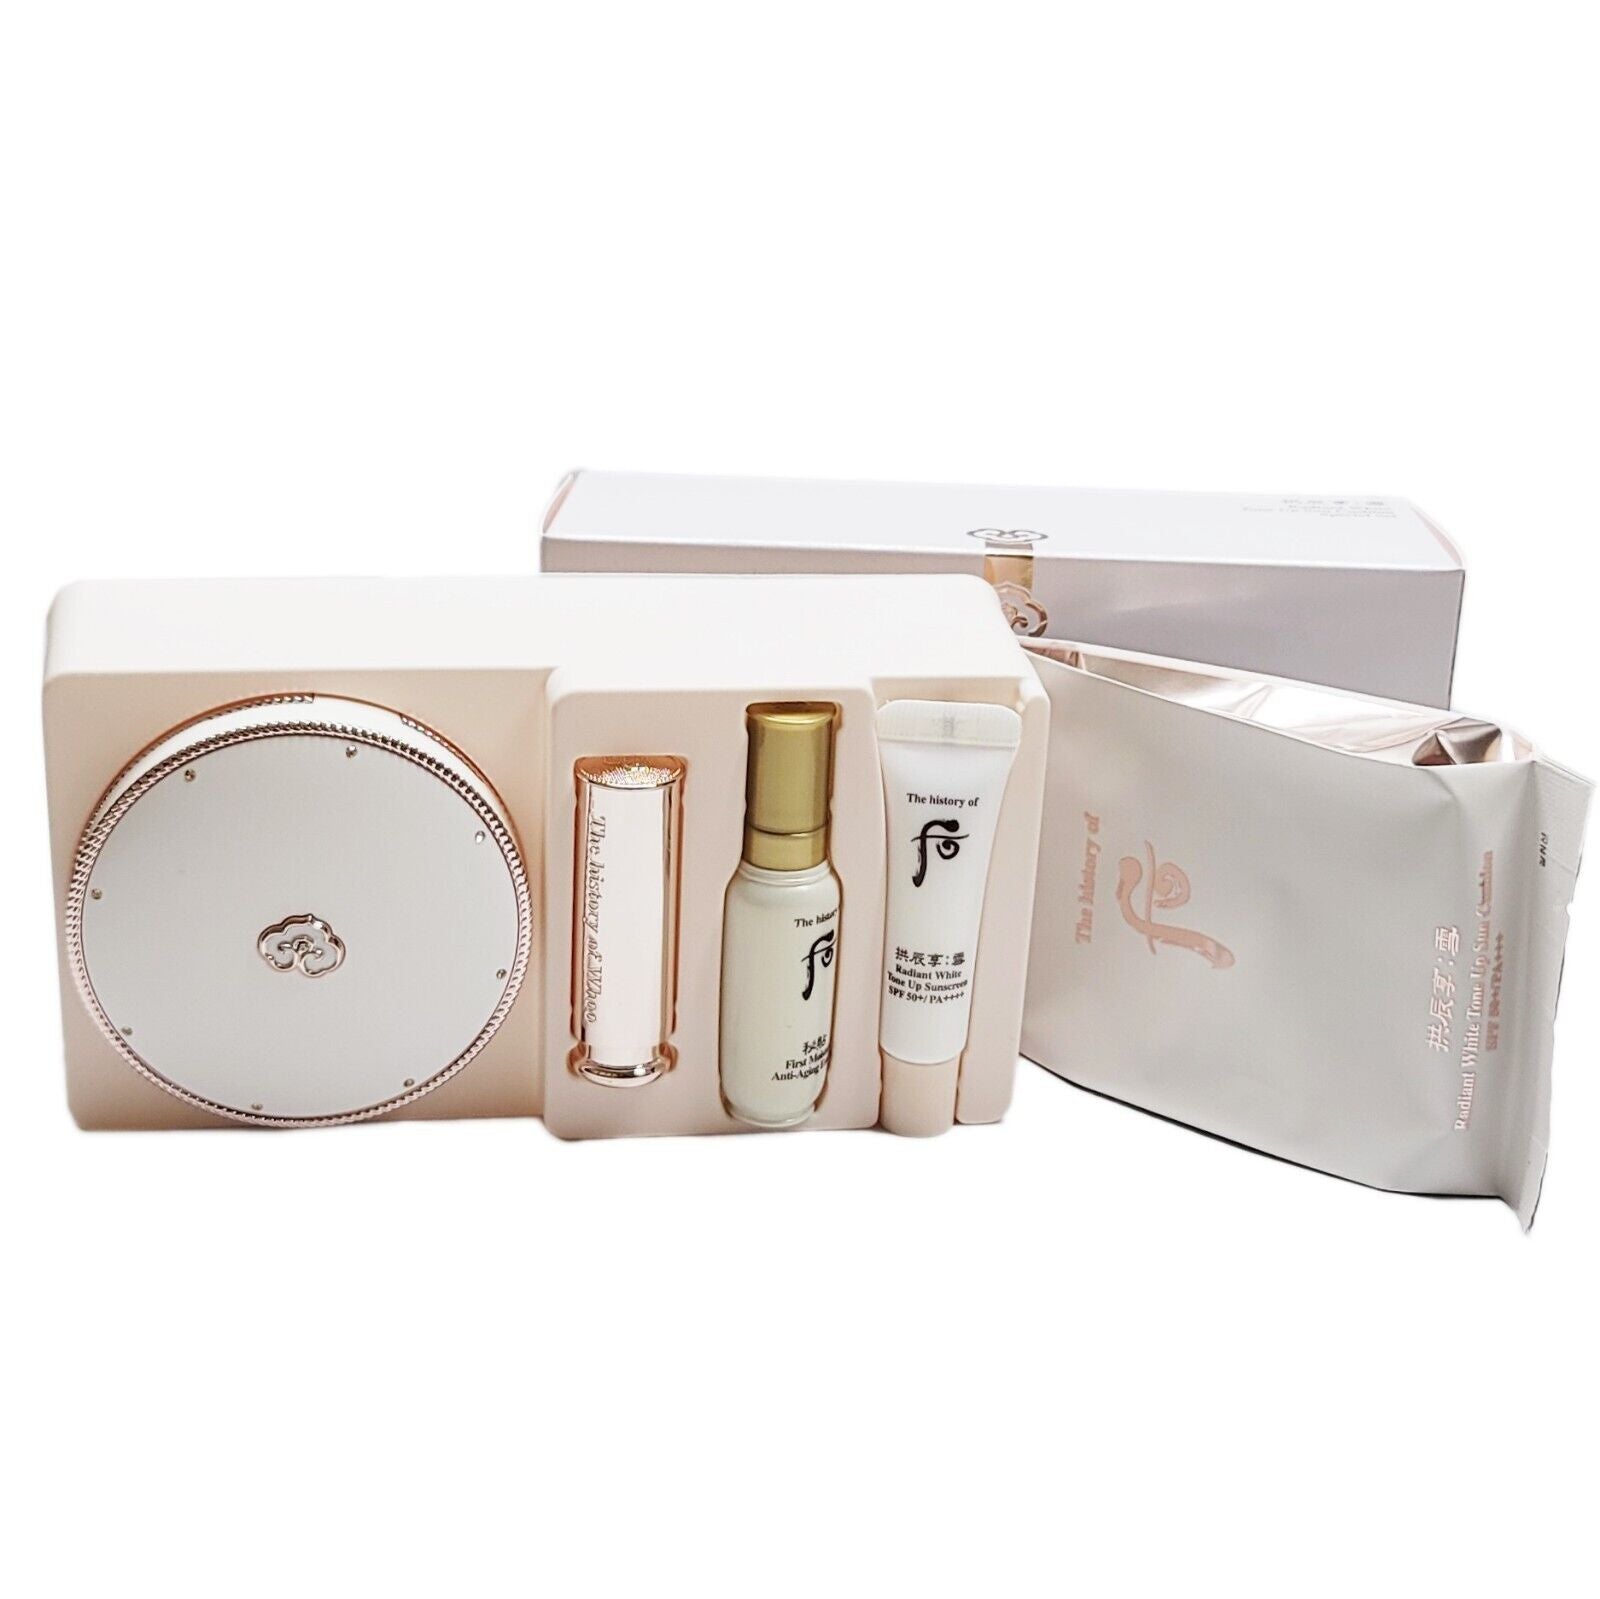 The history of Whoo Seol Radiant White Tone Up Sun Cushion SPF50+ 13g+Refill Set